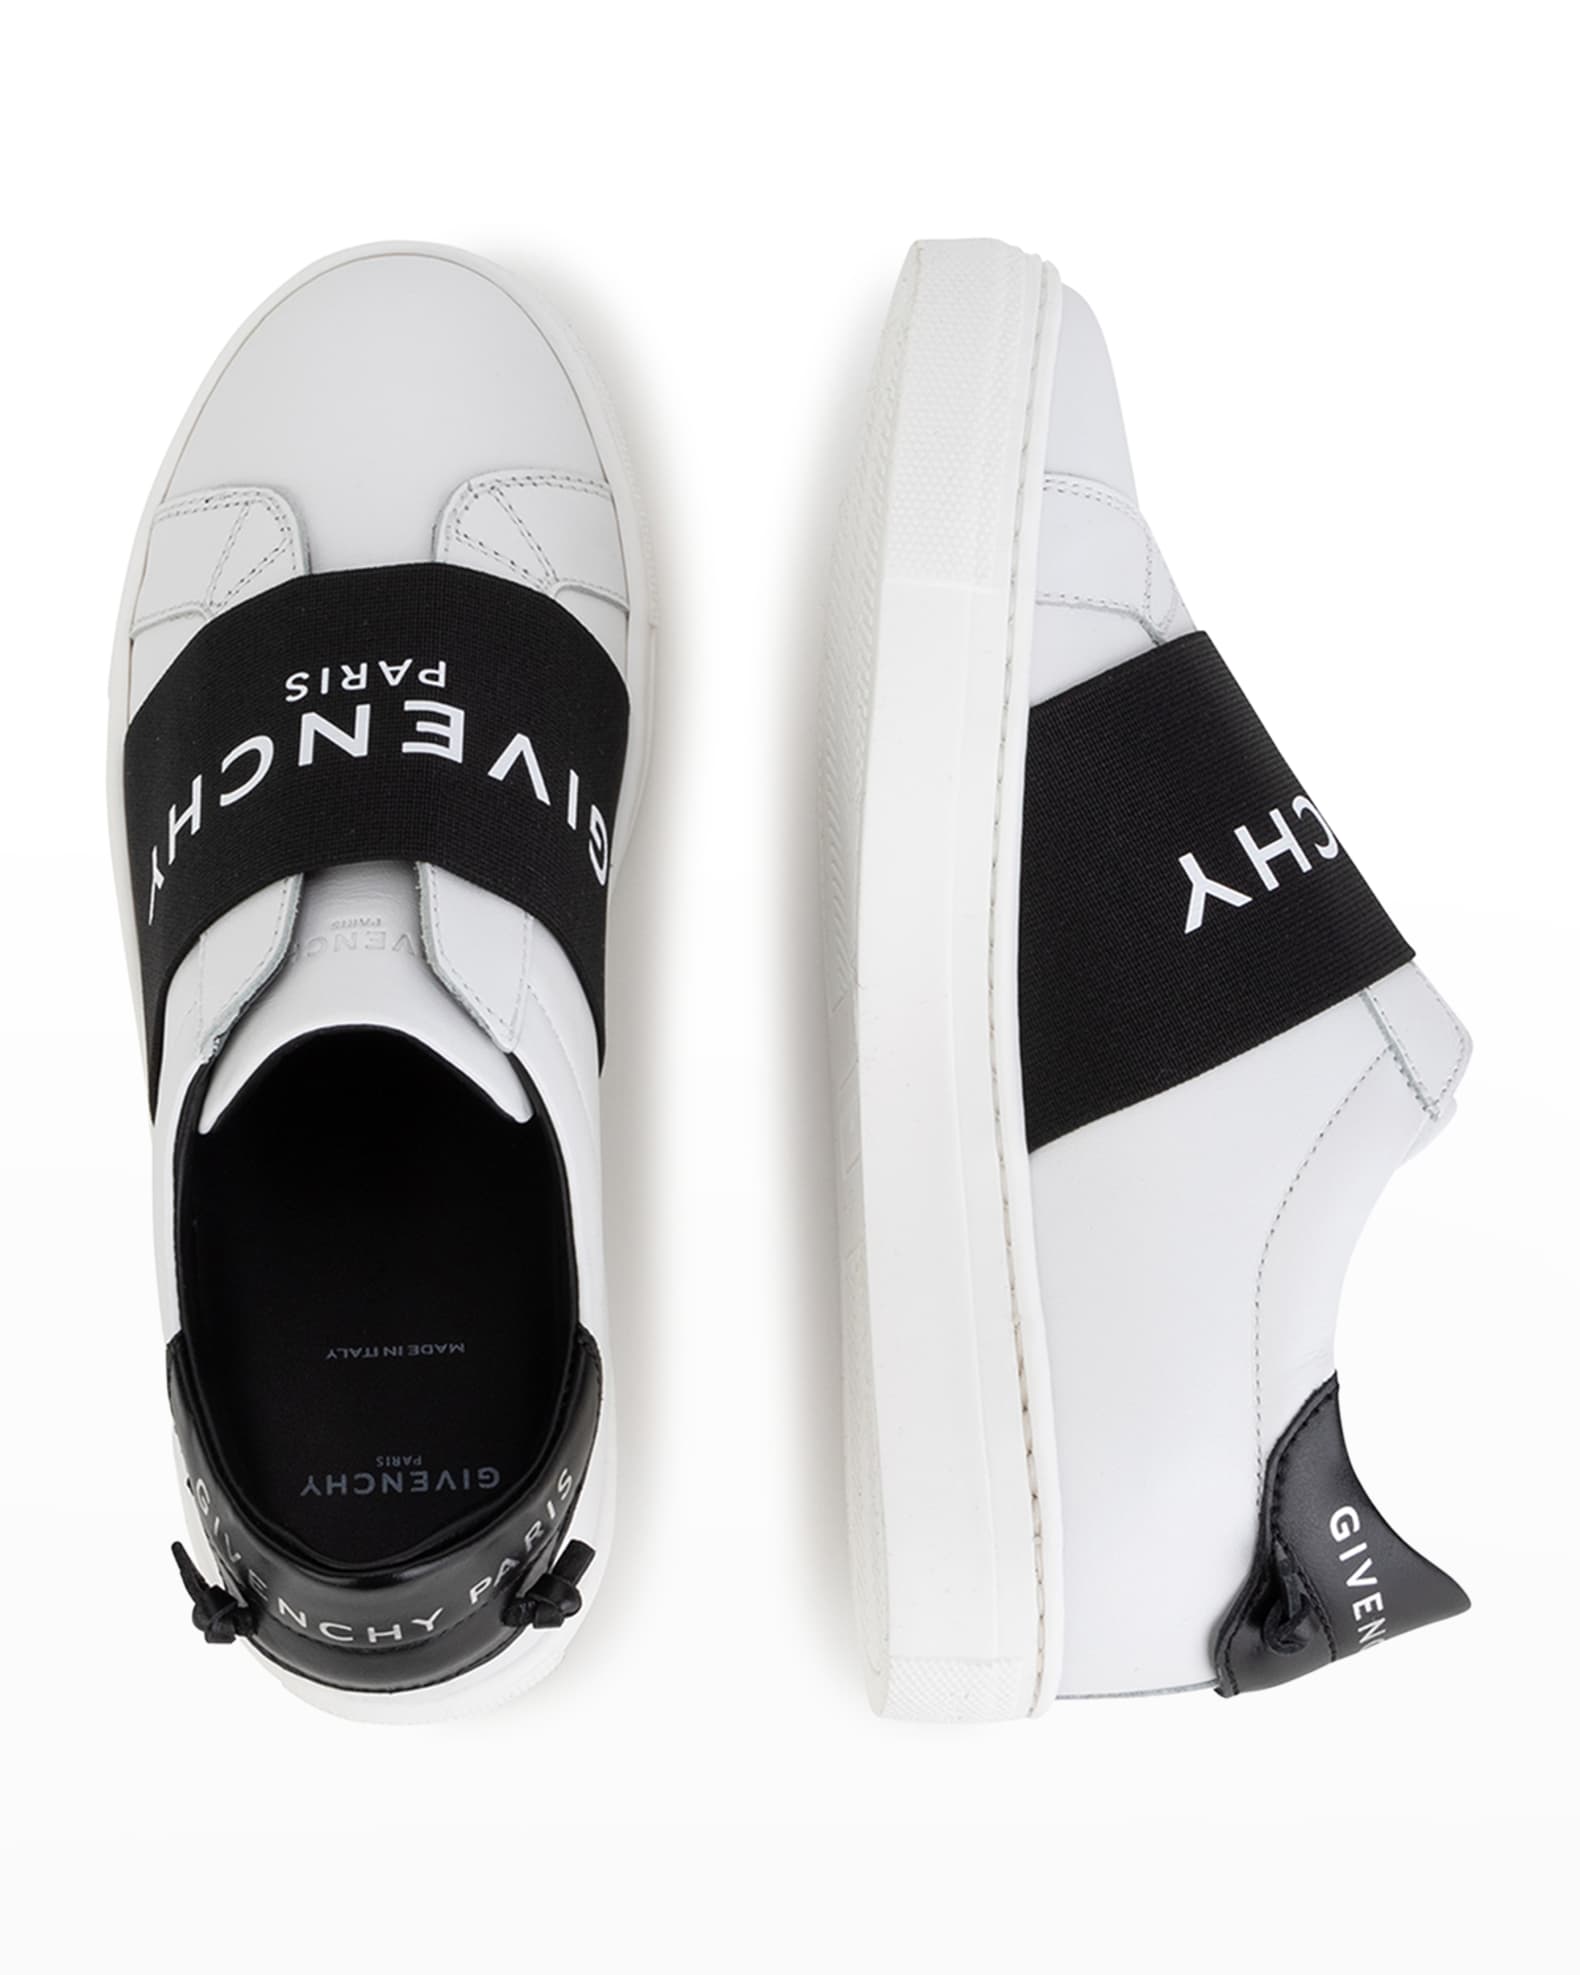 SNEAKER W GIVENCHY ELASTIC STRAP | Neiman Marcus